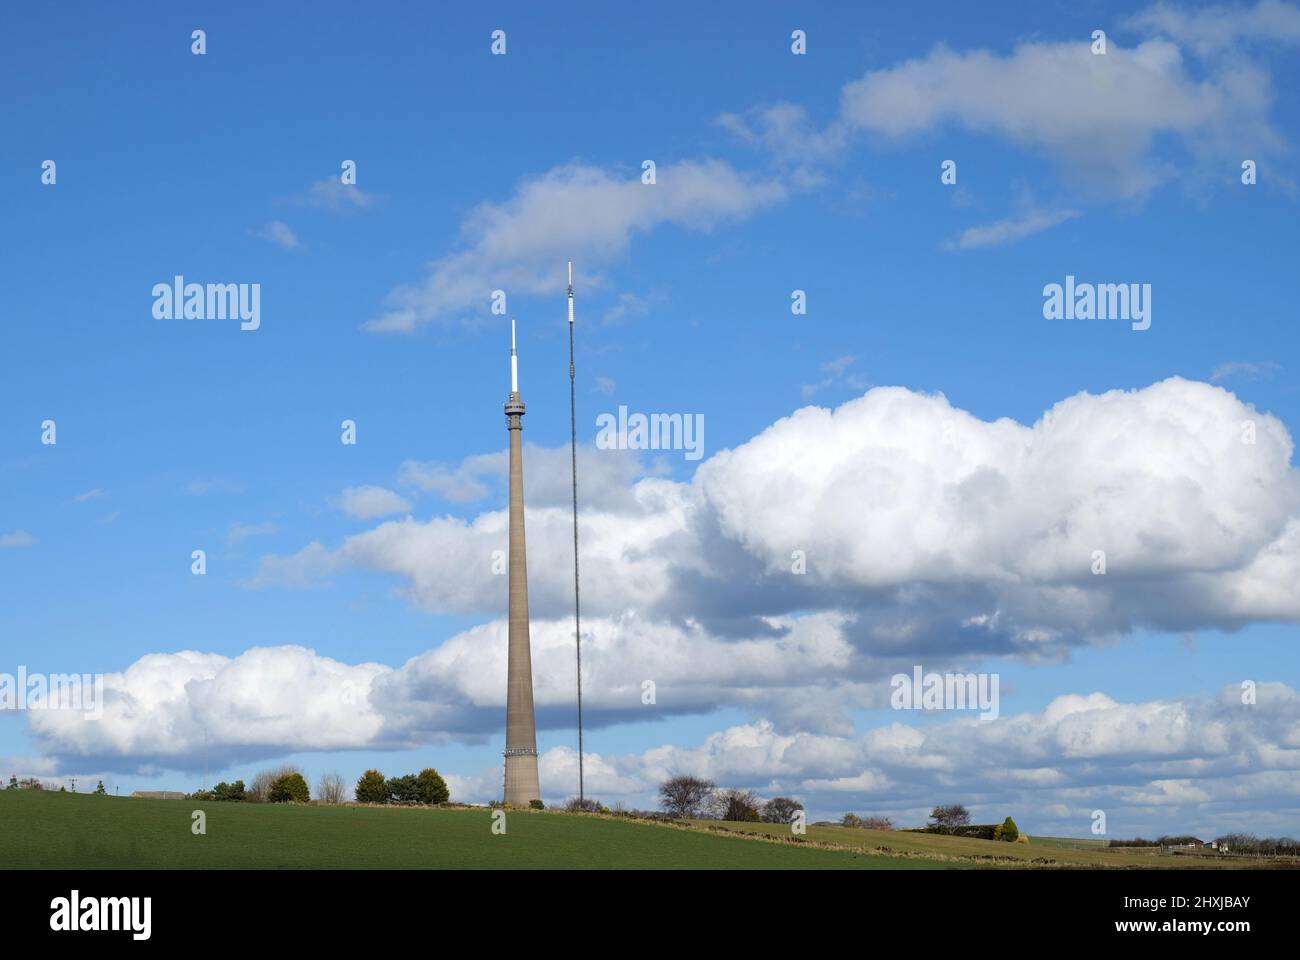 Two tall transmitter masts low white clouds in blue sky and green field Stock Photo